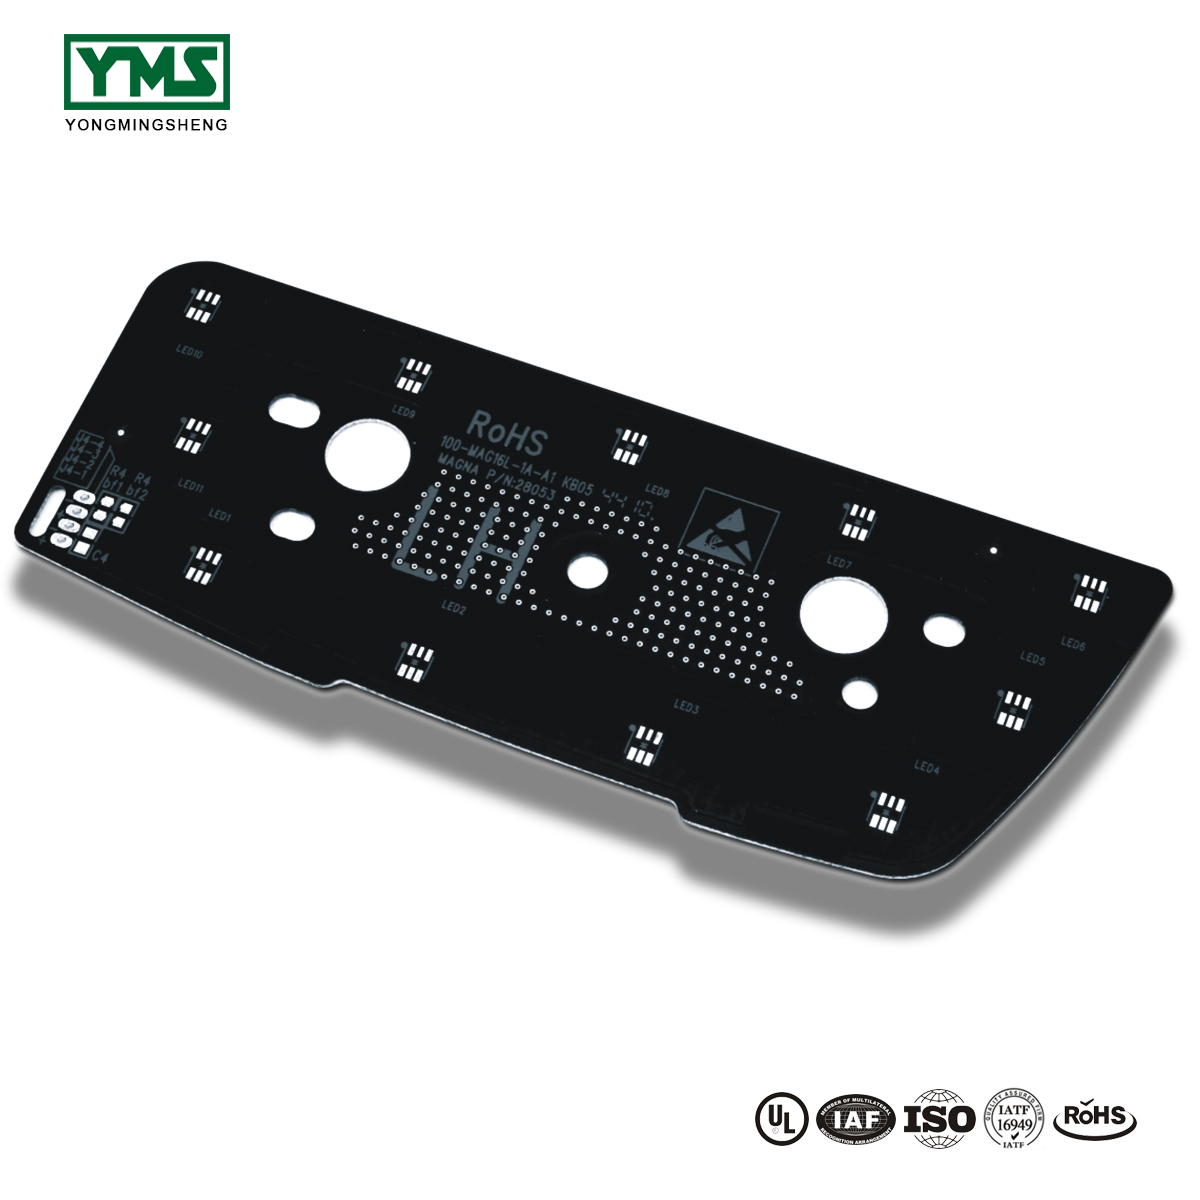 Wholesale Dealers of Thick Gold Fpc - 4 Layer (4/4/4/4OZ) Heavy Copper Black Soldermask Board | YMS PCB – Yongmingsheng